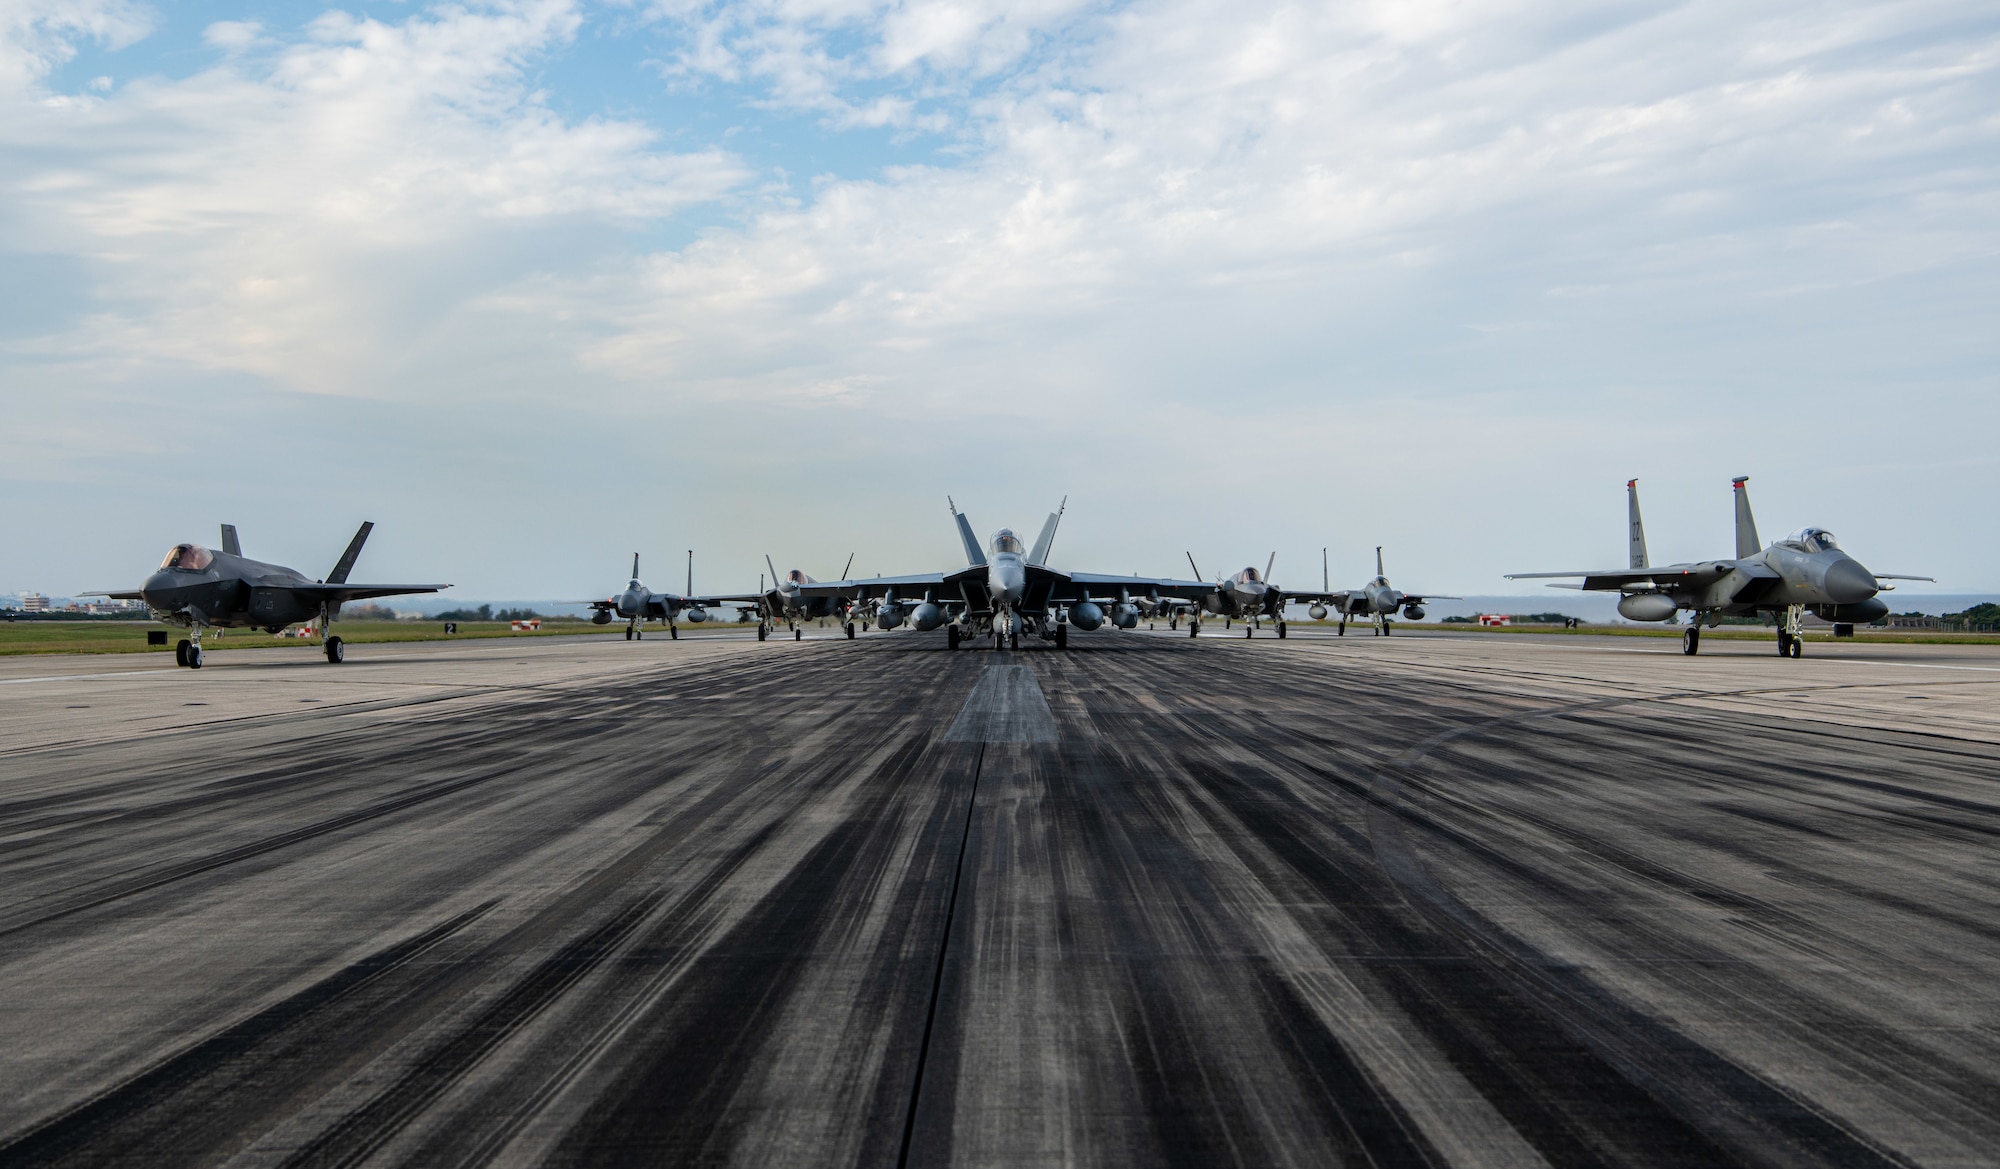 Fighter jets pose on a runway.